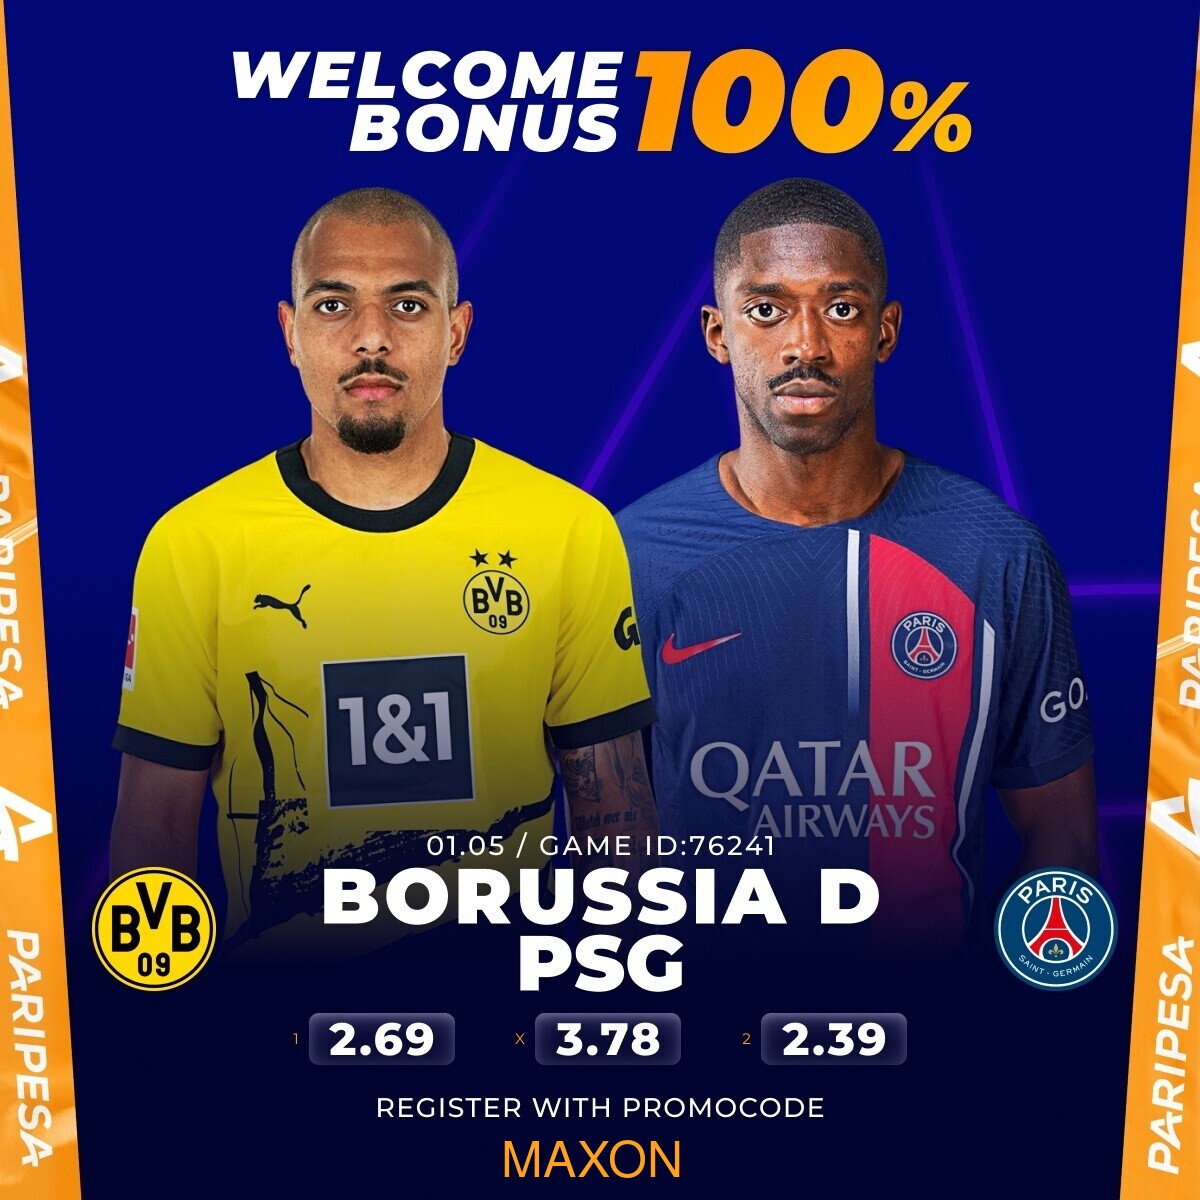 #ChampionsLeague tunapea Nani kichwa BVB  ama PSG  😁
Paripesa Tukona Boosted odds on all games Tax free on stake or winnings
Fast payouts and deposits 
Wide markets
Deposit as low as 70 KES

How to register with
Link: bit.ly/3QIlmmG
 promocode: MAXON

Chelsea Timber…